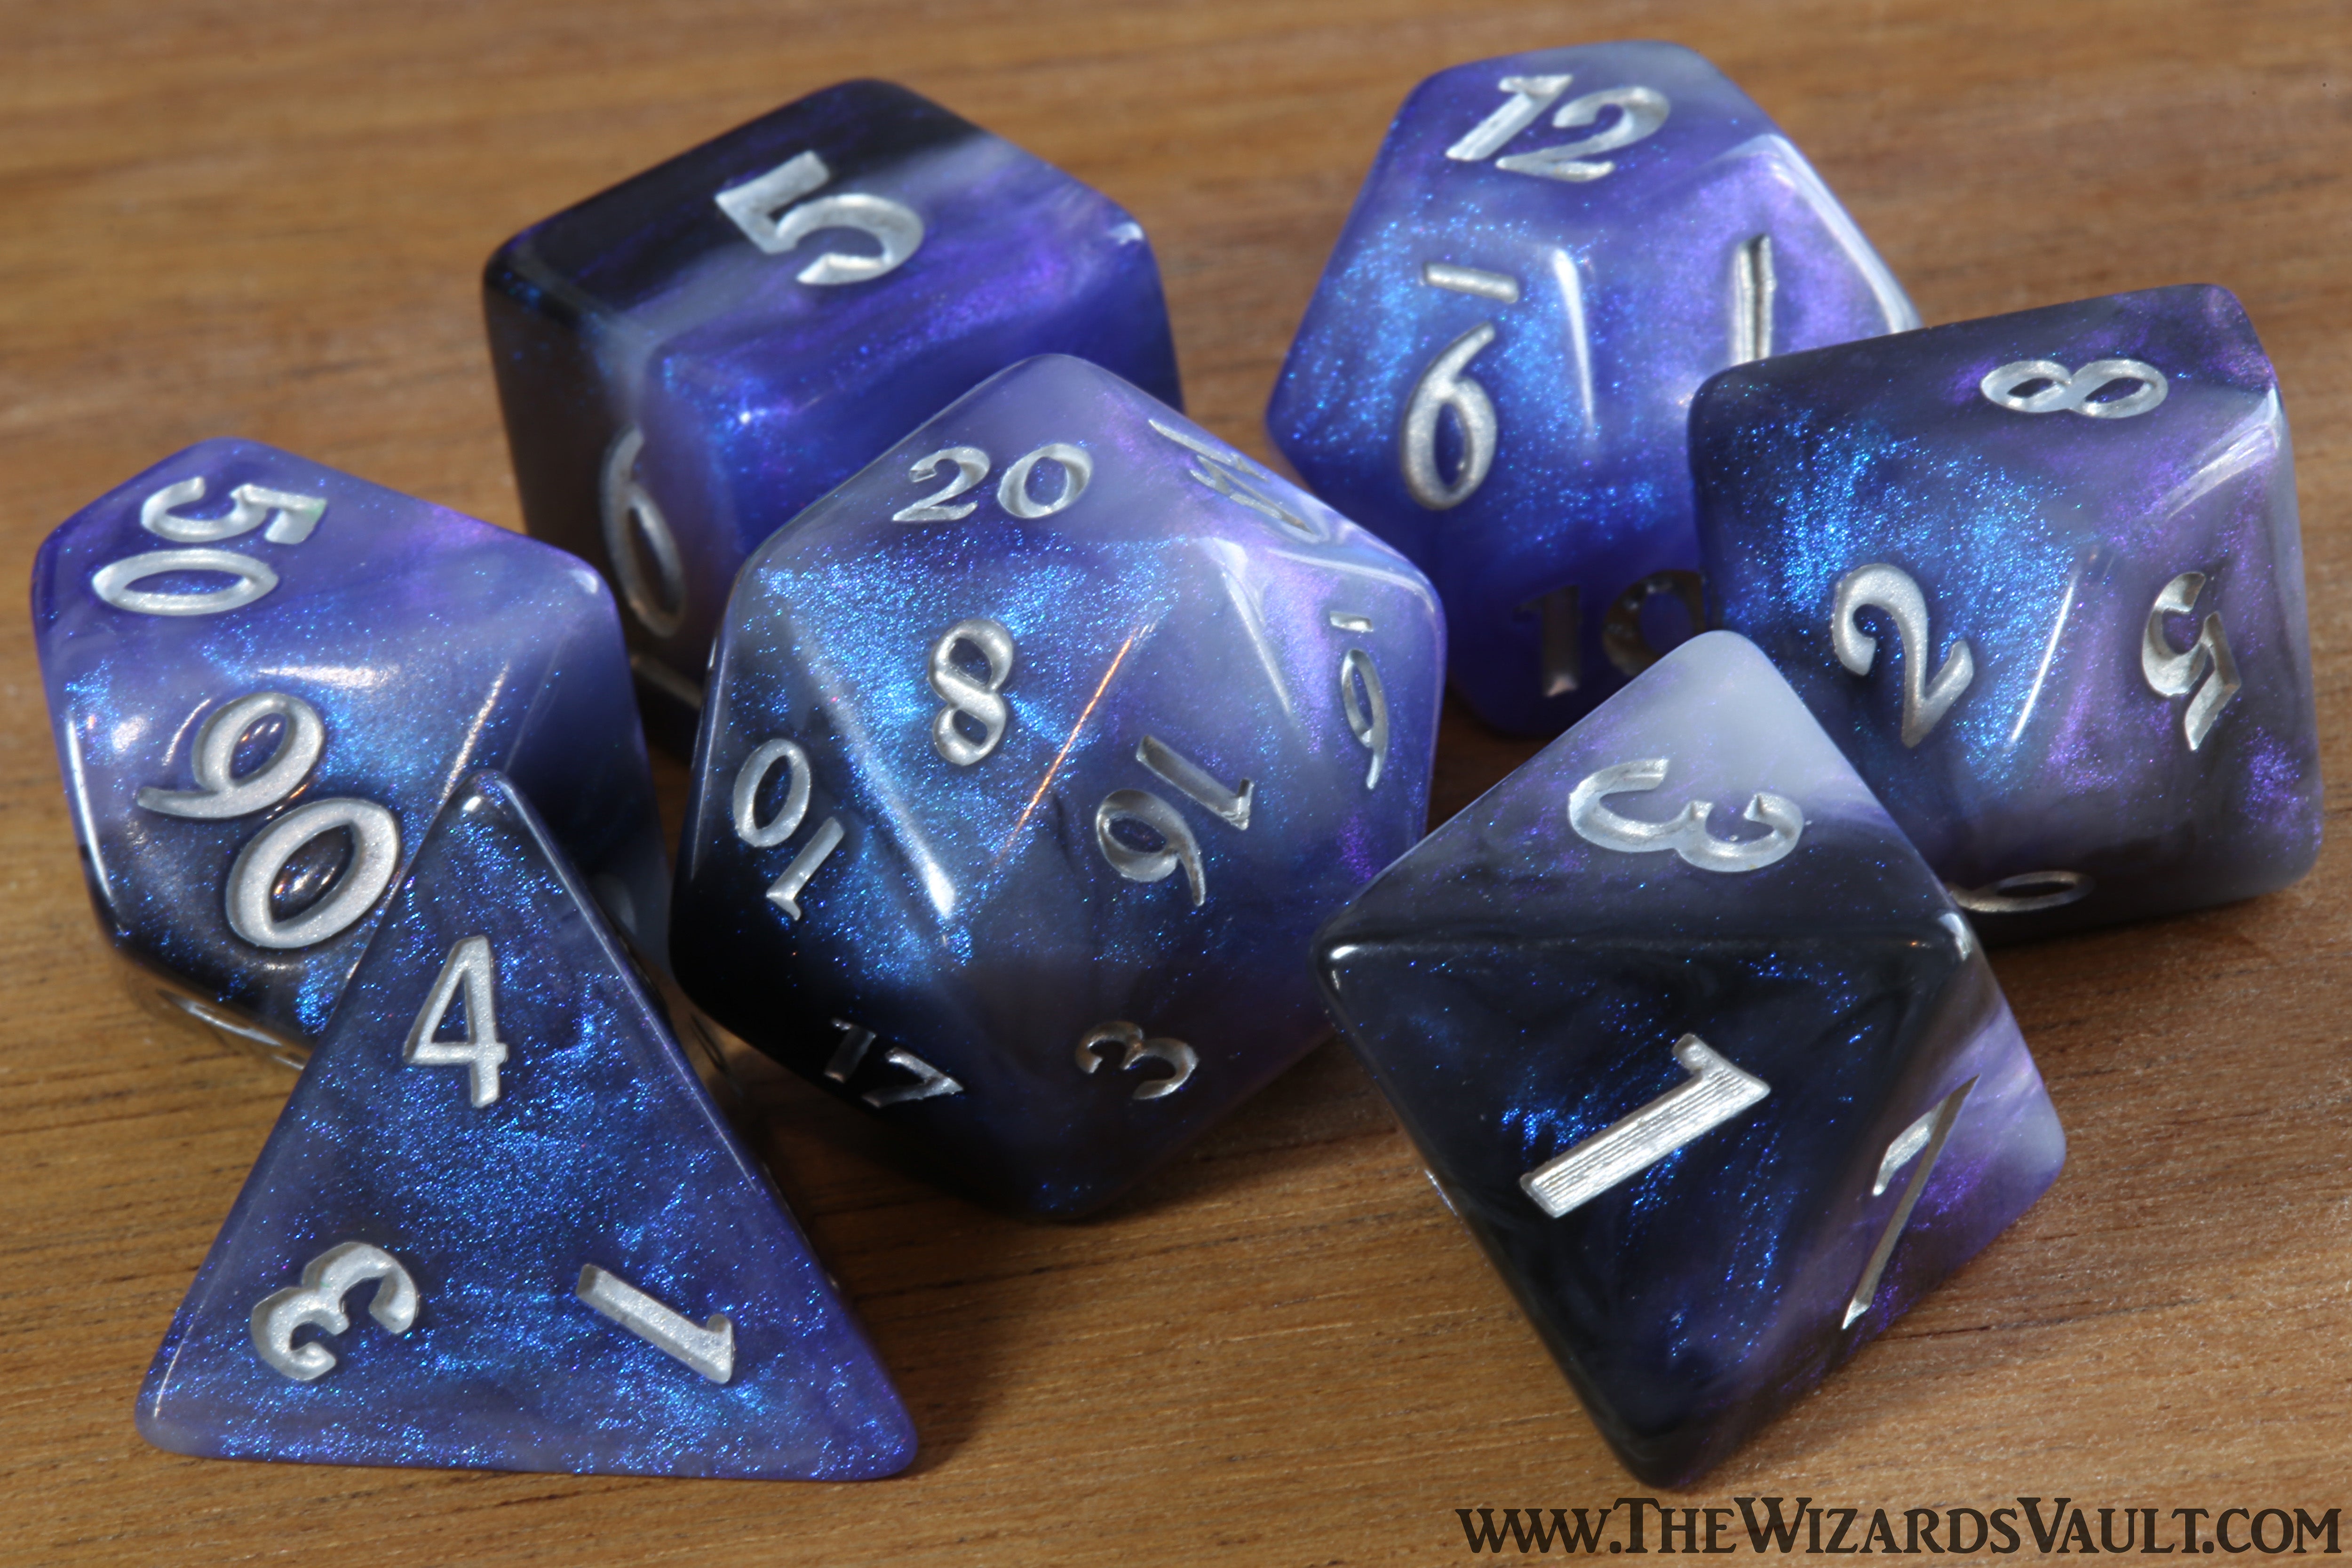 Morpheus Wings - Semi-opaque with iridescent blue and purple glitters - The Wizard's Vault